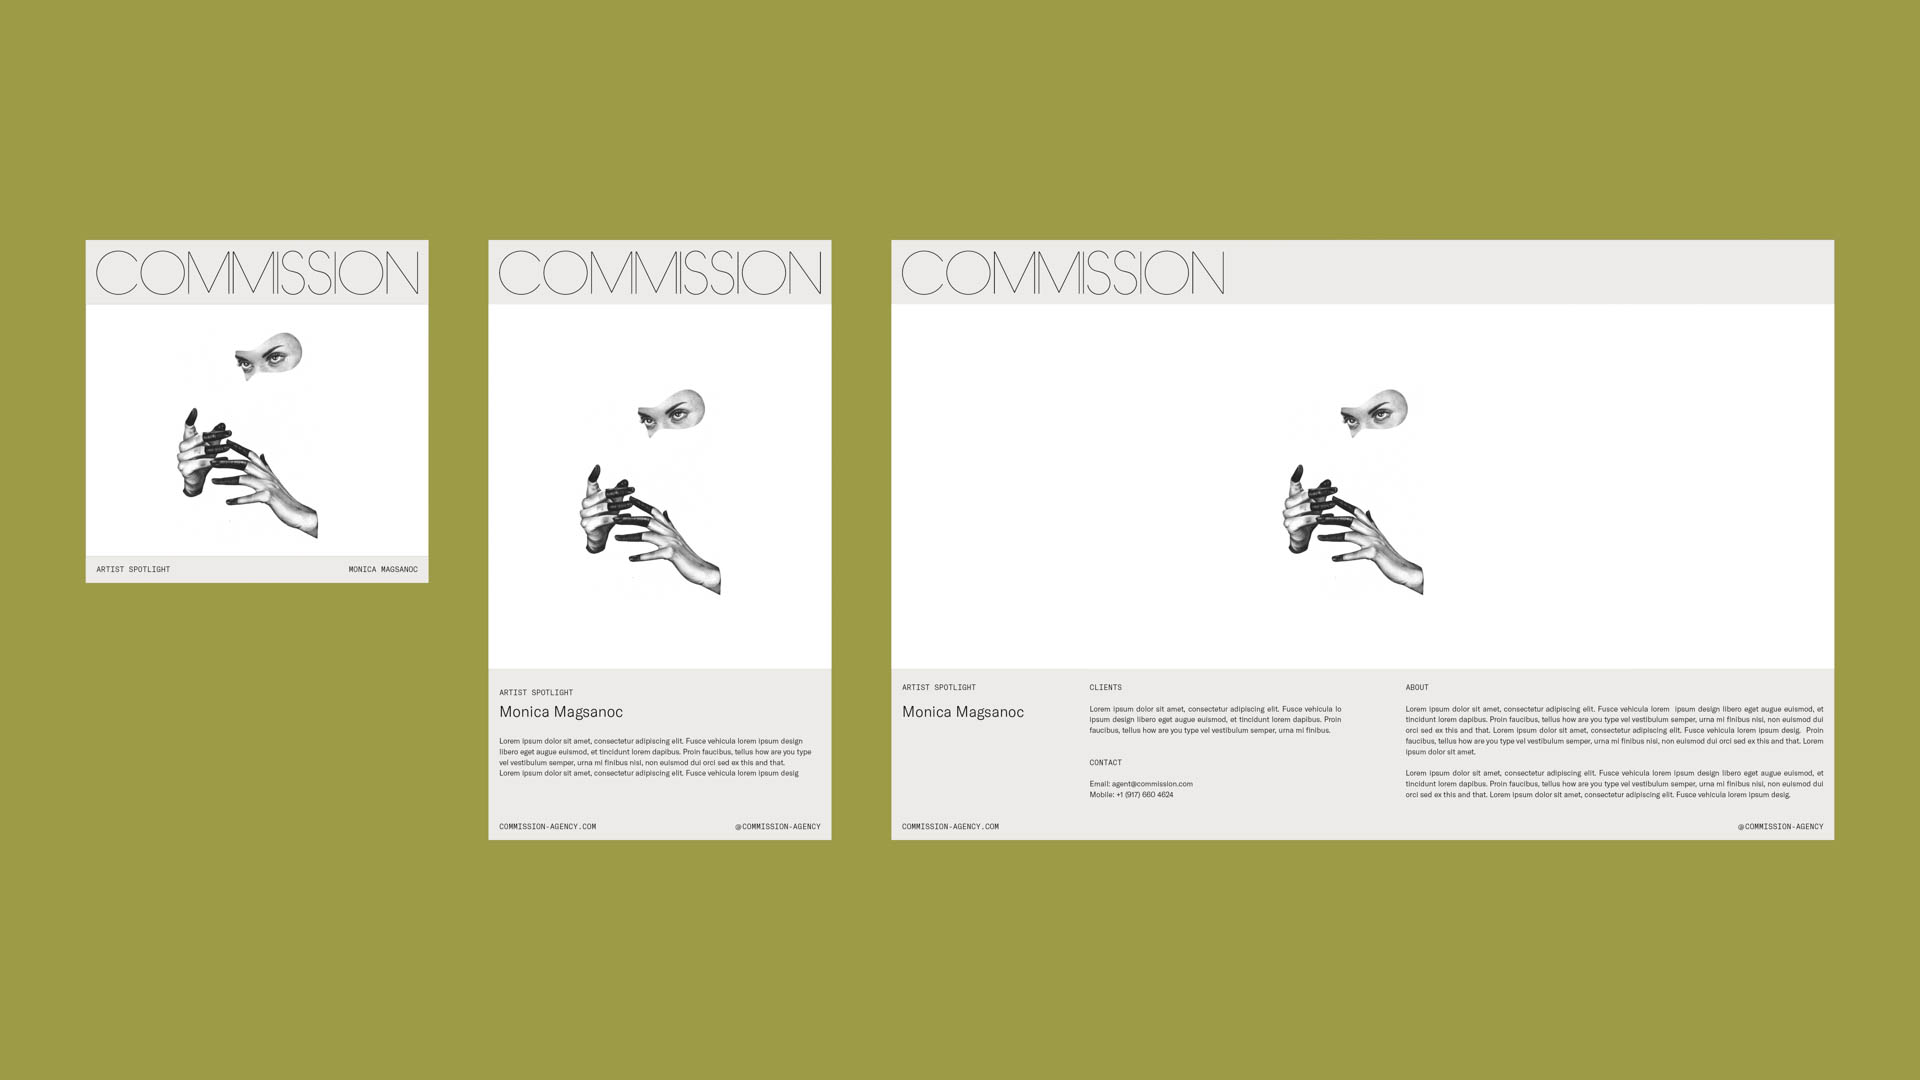 three different user interfaces for the website Commission